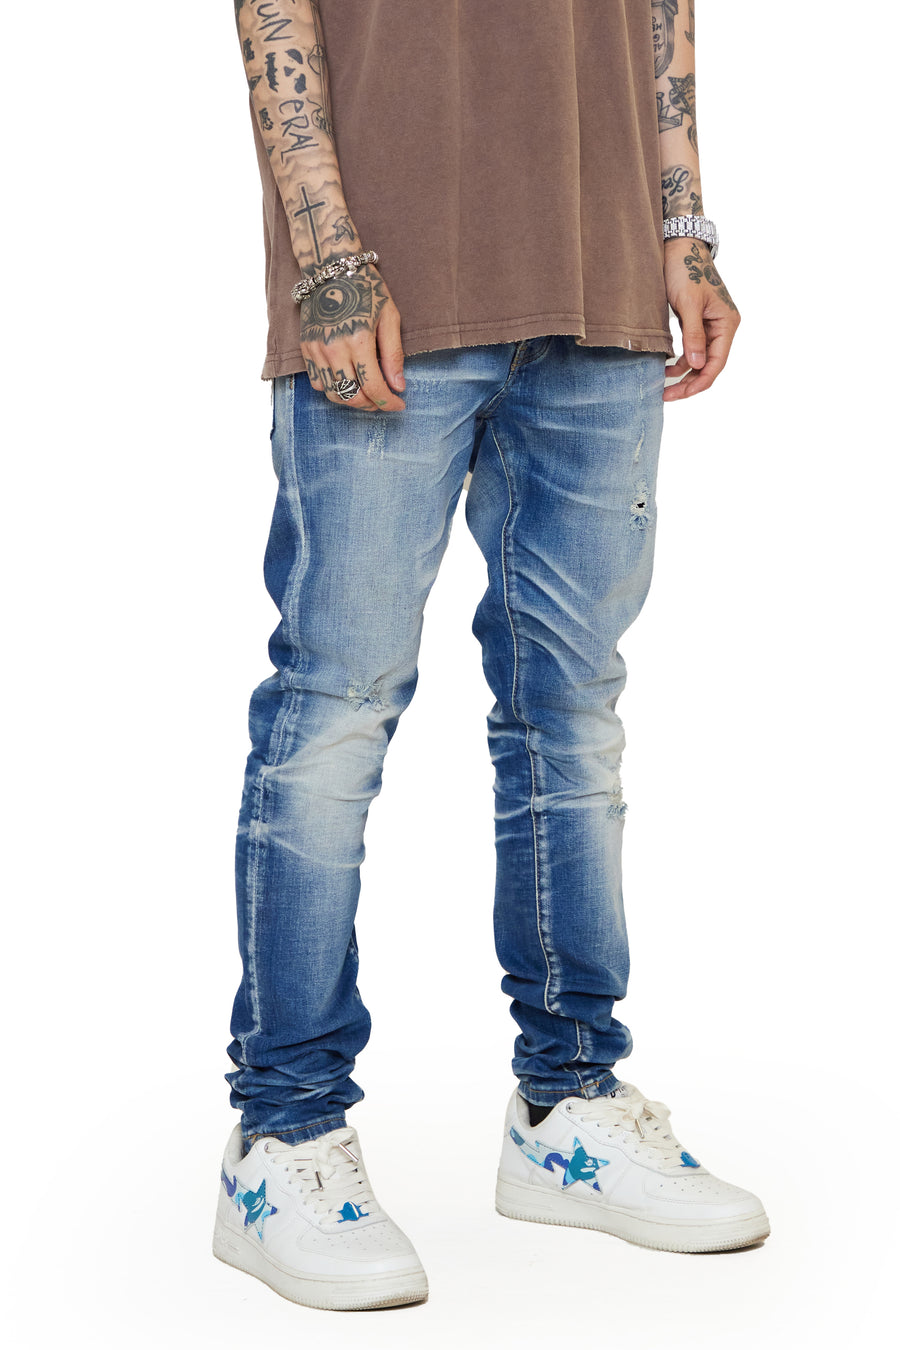 VALABASAS SKINNY “CLASSIFIED” LT WASHED